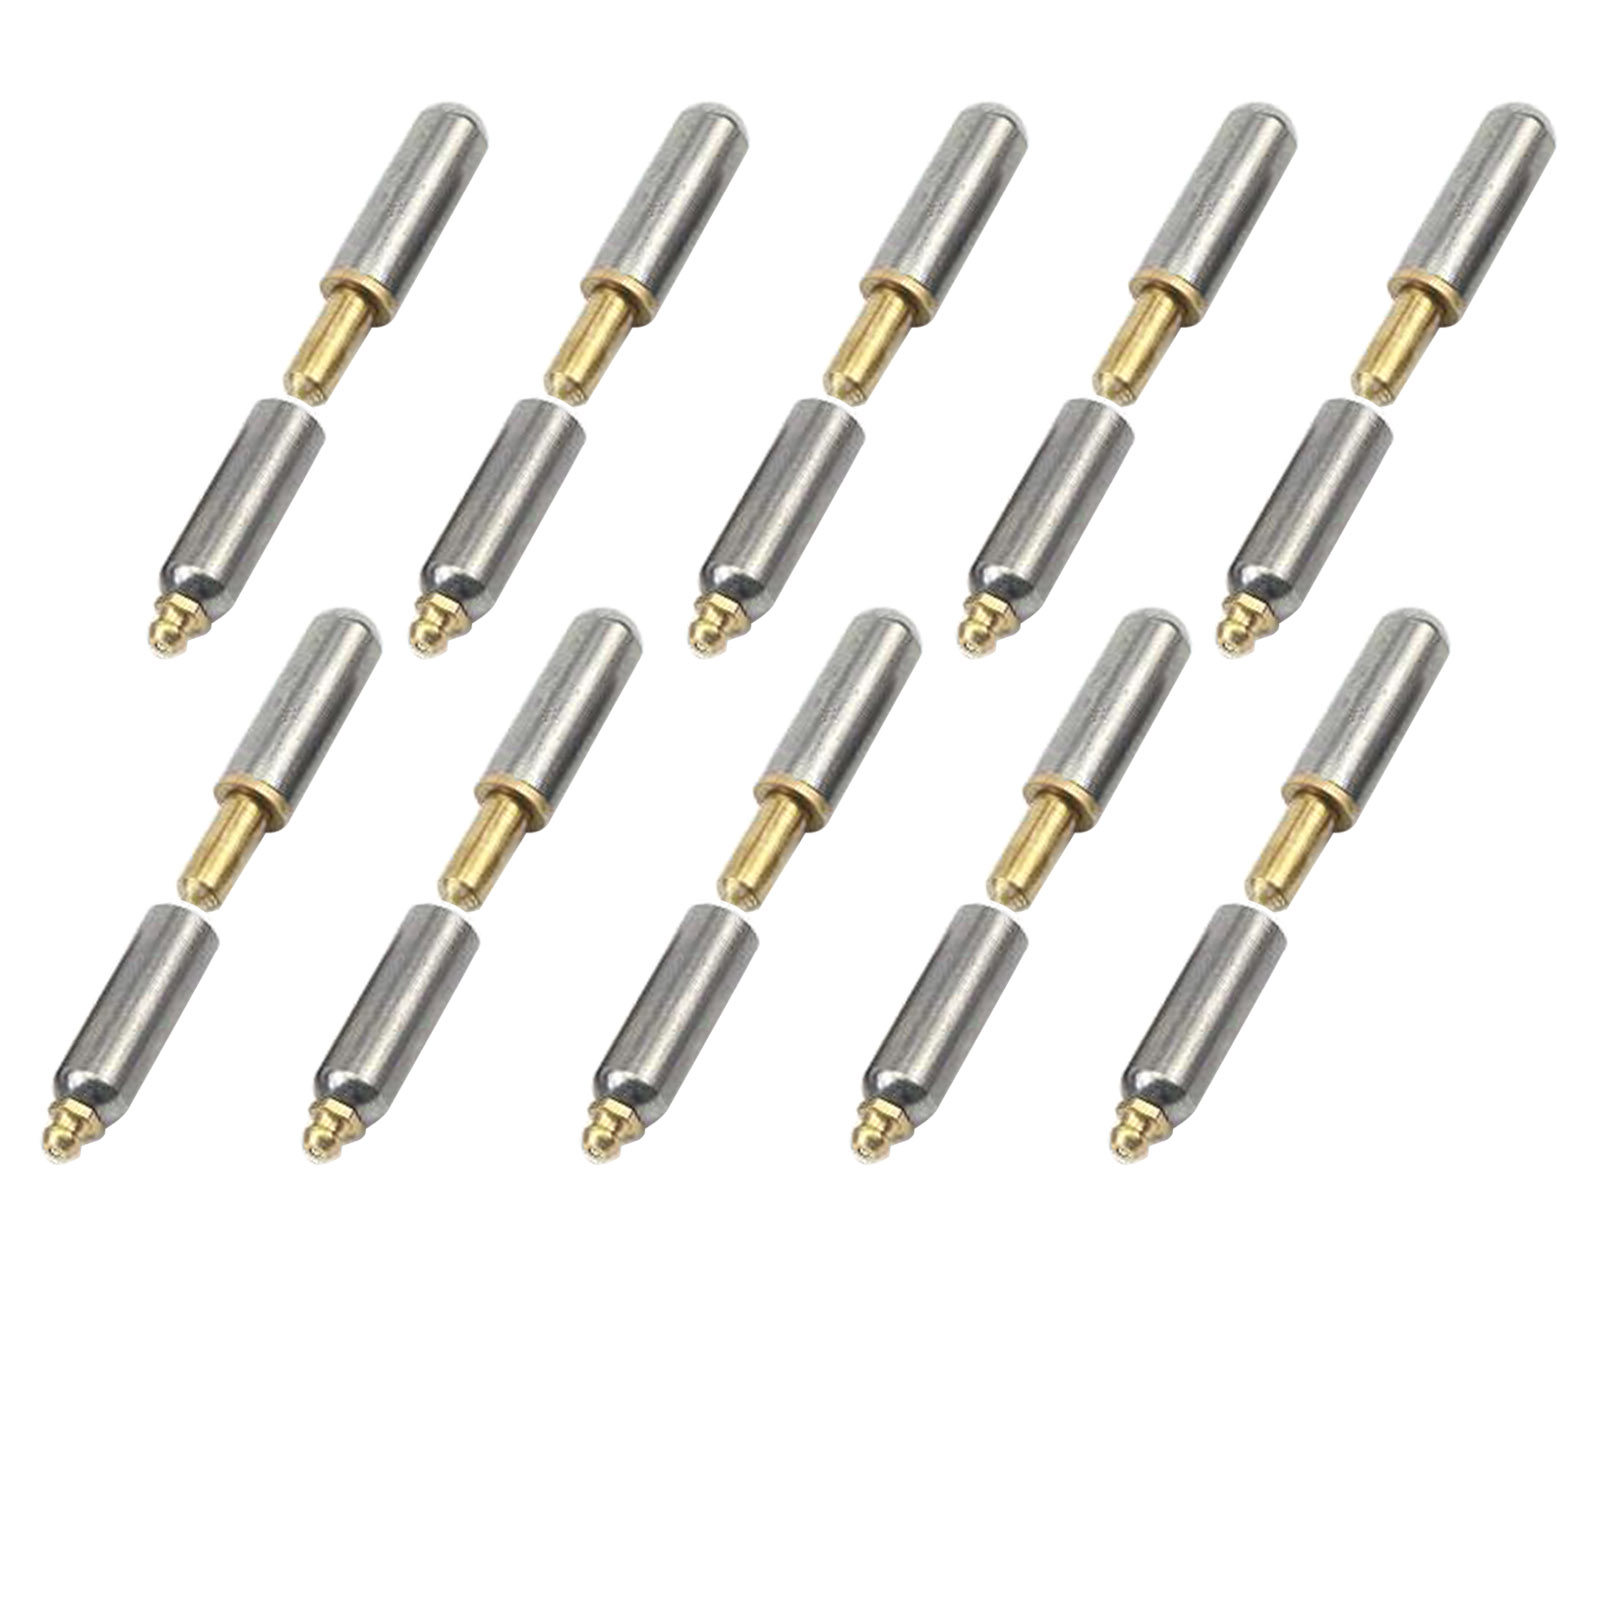 Steel Weld On Bullet Hinges With Brass Pin Grease Fitting 16x100mm 10pcs